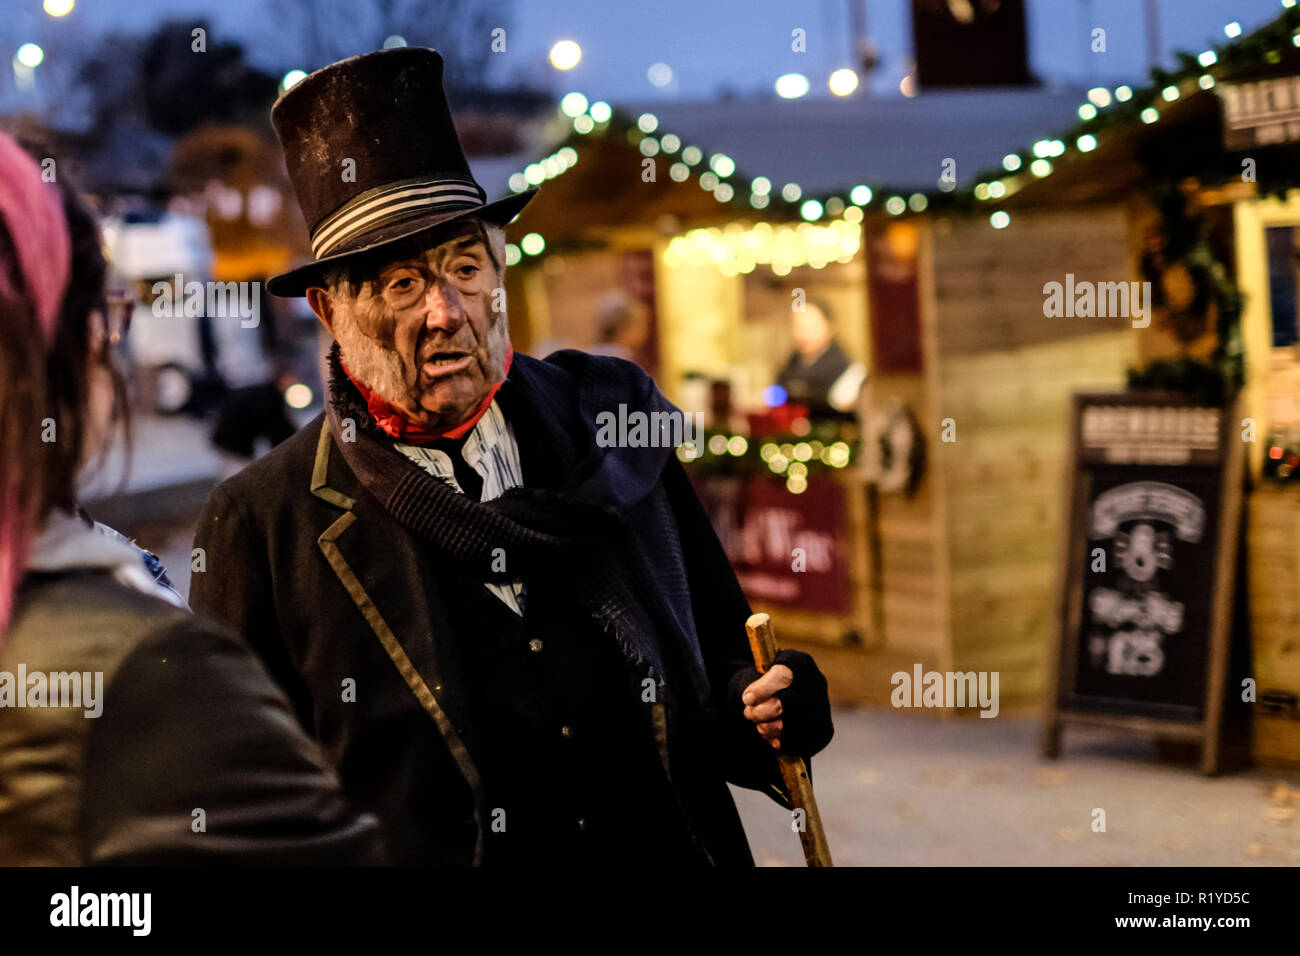 Gloucester, UK. 15th Nov 2018. Gloucesters historic market is a draw for visitors and locals. Stall holders dress up in victorian costume to provide a period atmosphere, Mr Burroughs the sweep offers good luck for a handshake and explains the life of a child chimmney sweep Credit: Mr Standfast/Alamy Live News Stock Photo